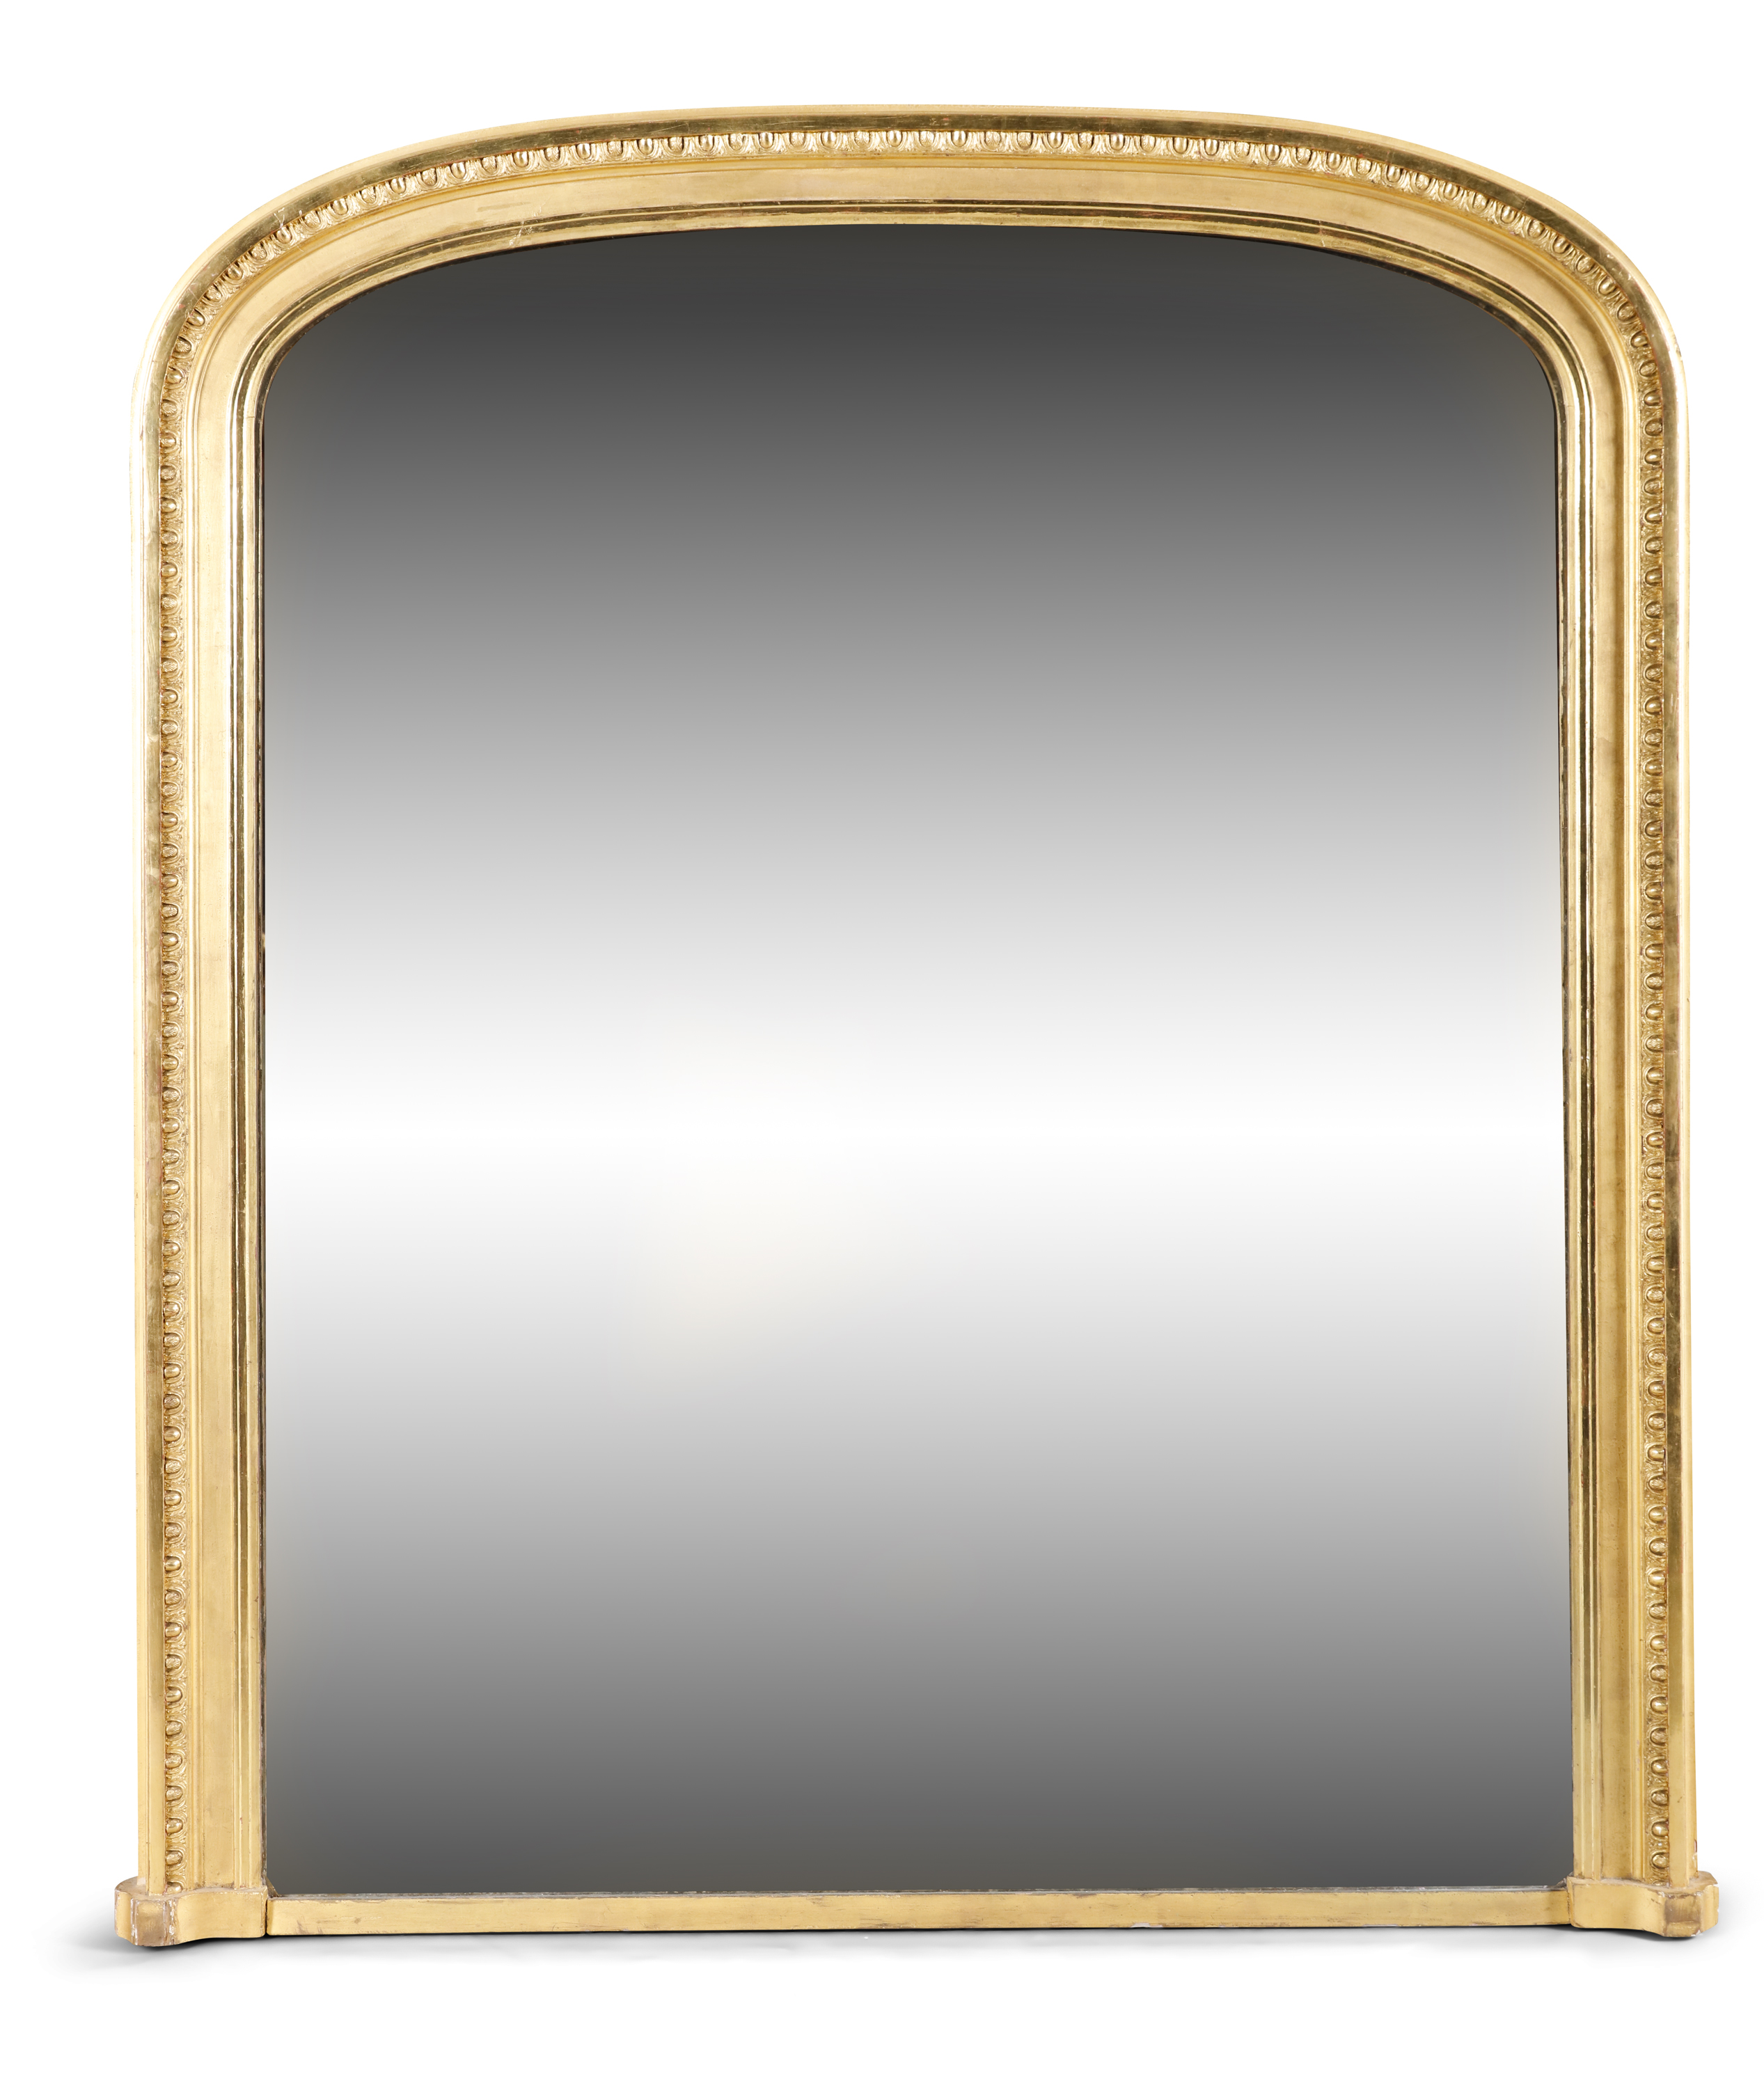 A LATE 19TH CENTURY GILTWOOD OVERMANTLE MIRROR, of domed rectangular form, the moulded frame